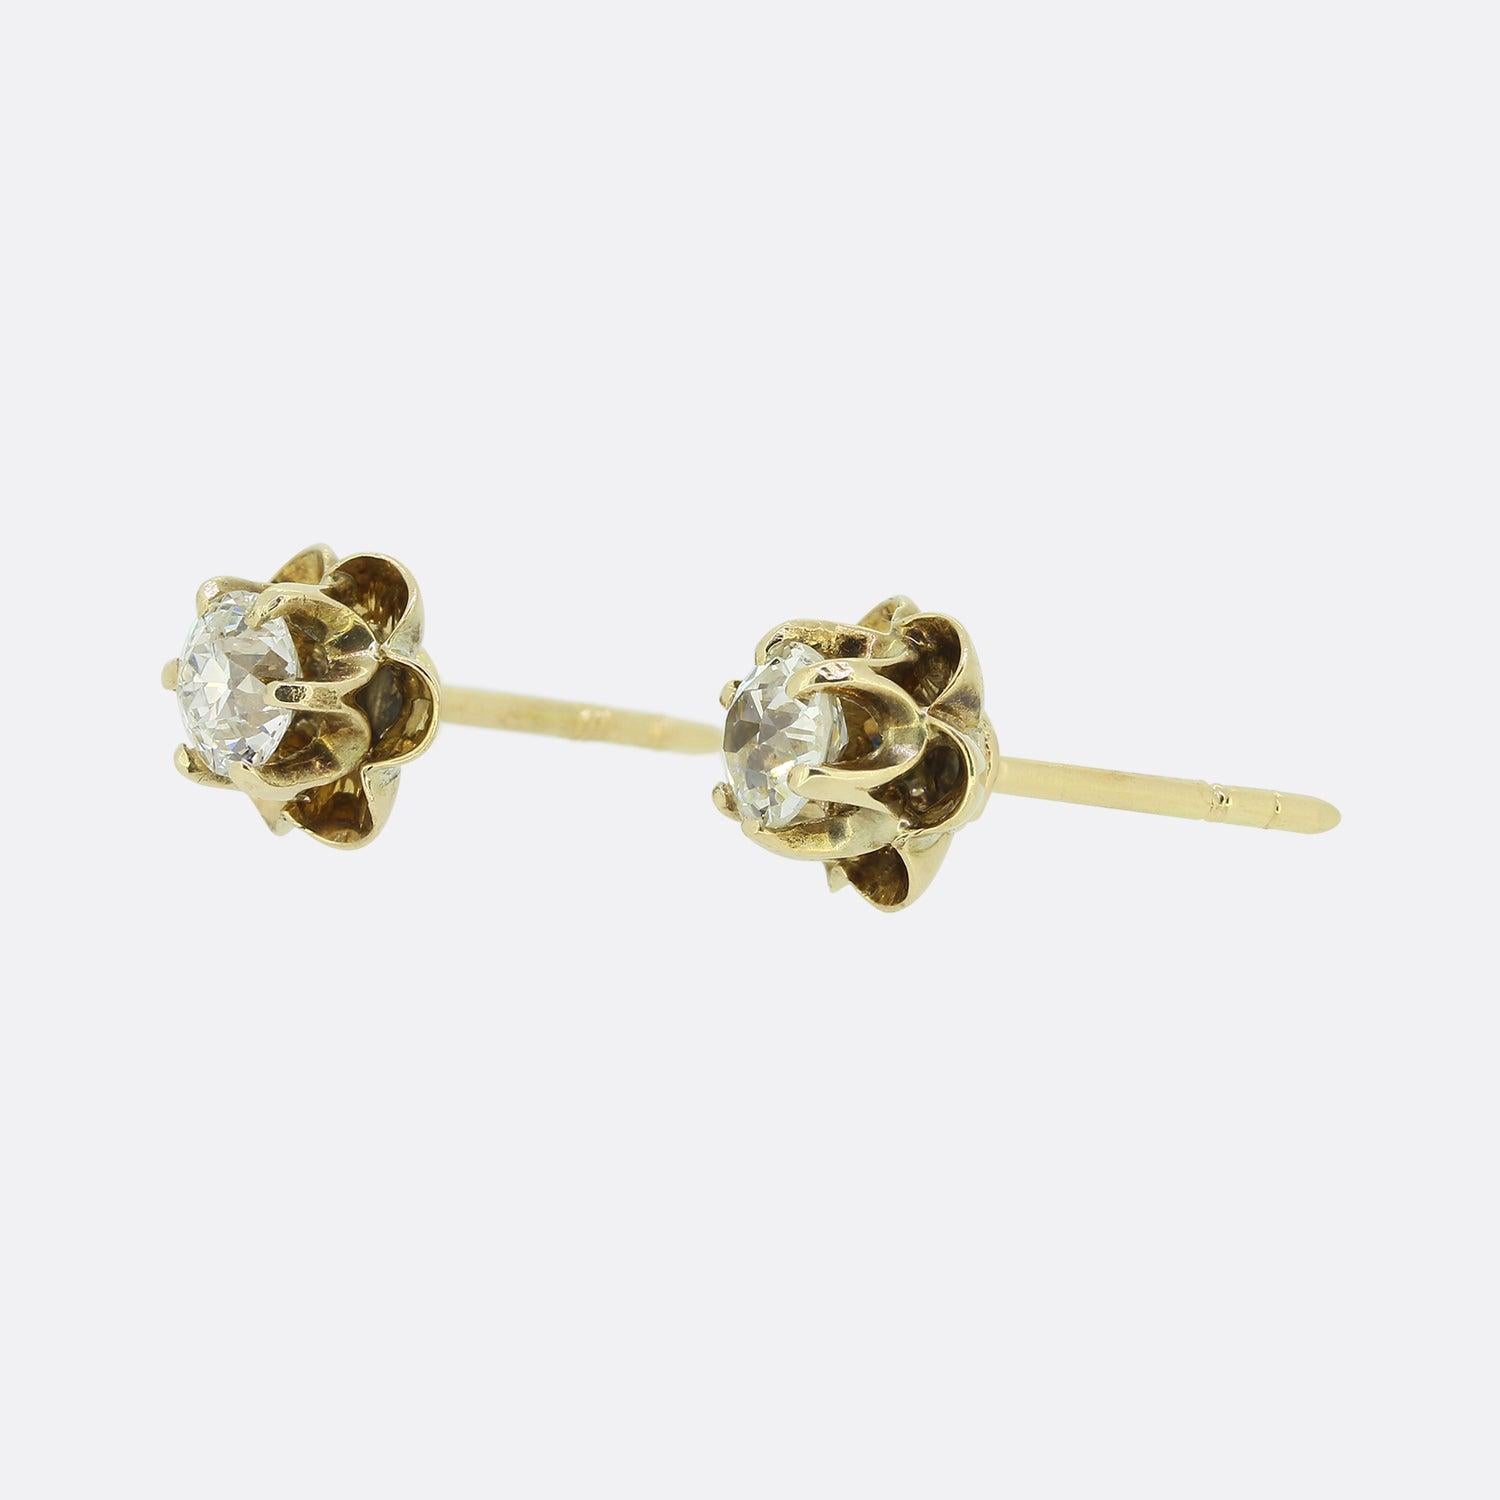 These are a pair of vintage 18ct yellow gold diamond stud earrings. Each earring has been crafted into the shape of a flower head and is set with a 0.30 carat old cut diamond within a 6 clawed mount. 


Condition: Used (Very Good)
Weight: 1.9